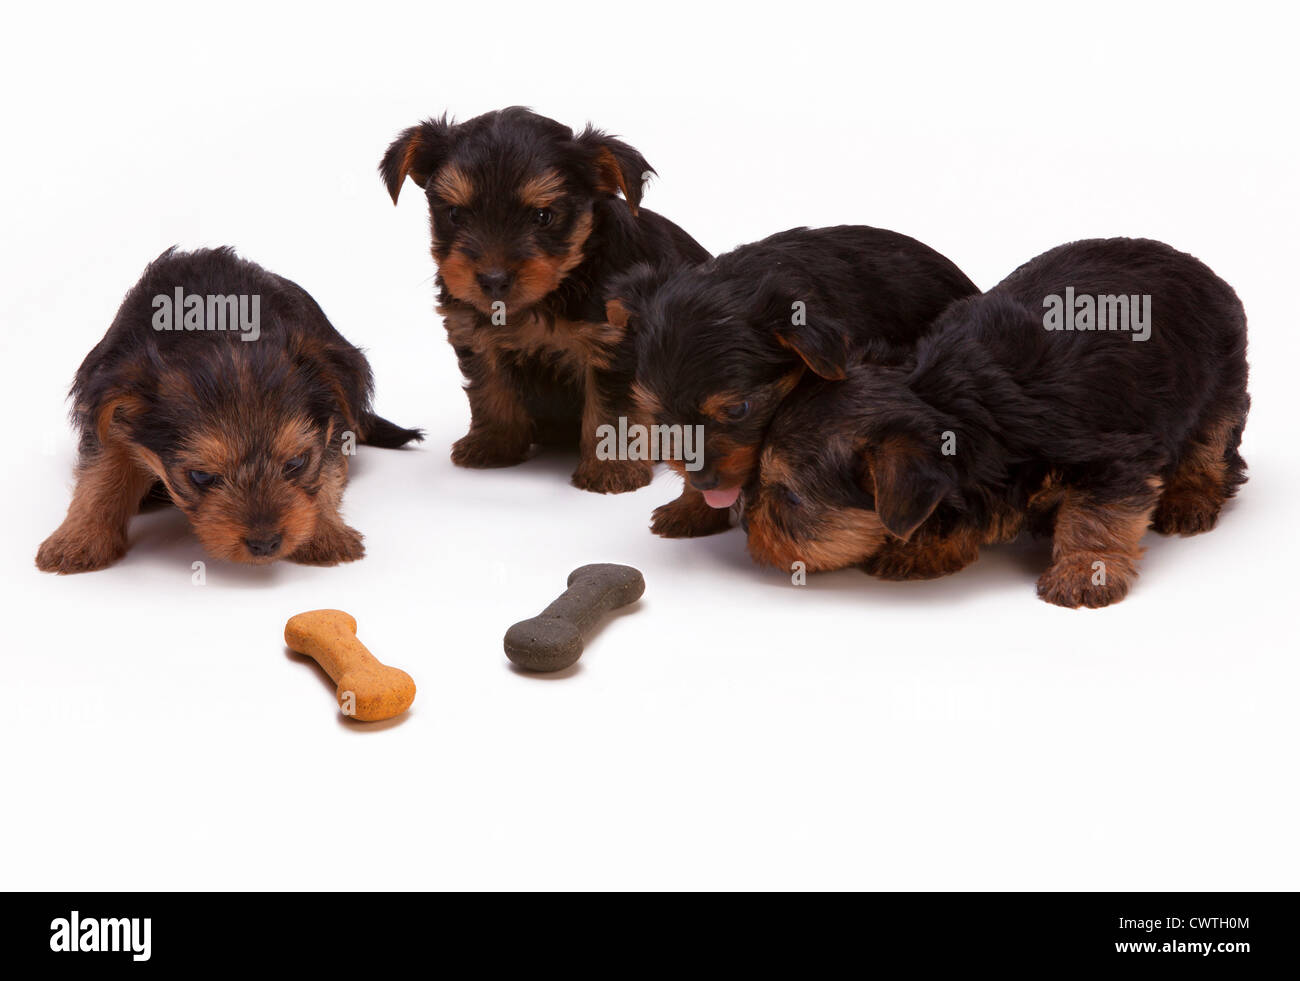 Four yorkie puppies from a litter inspecting some dog biscuits Stock Photo